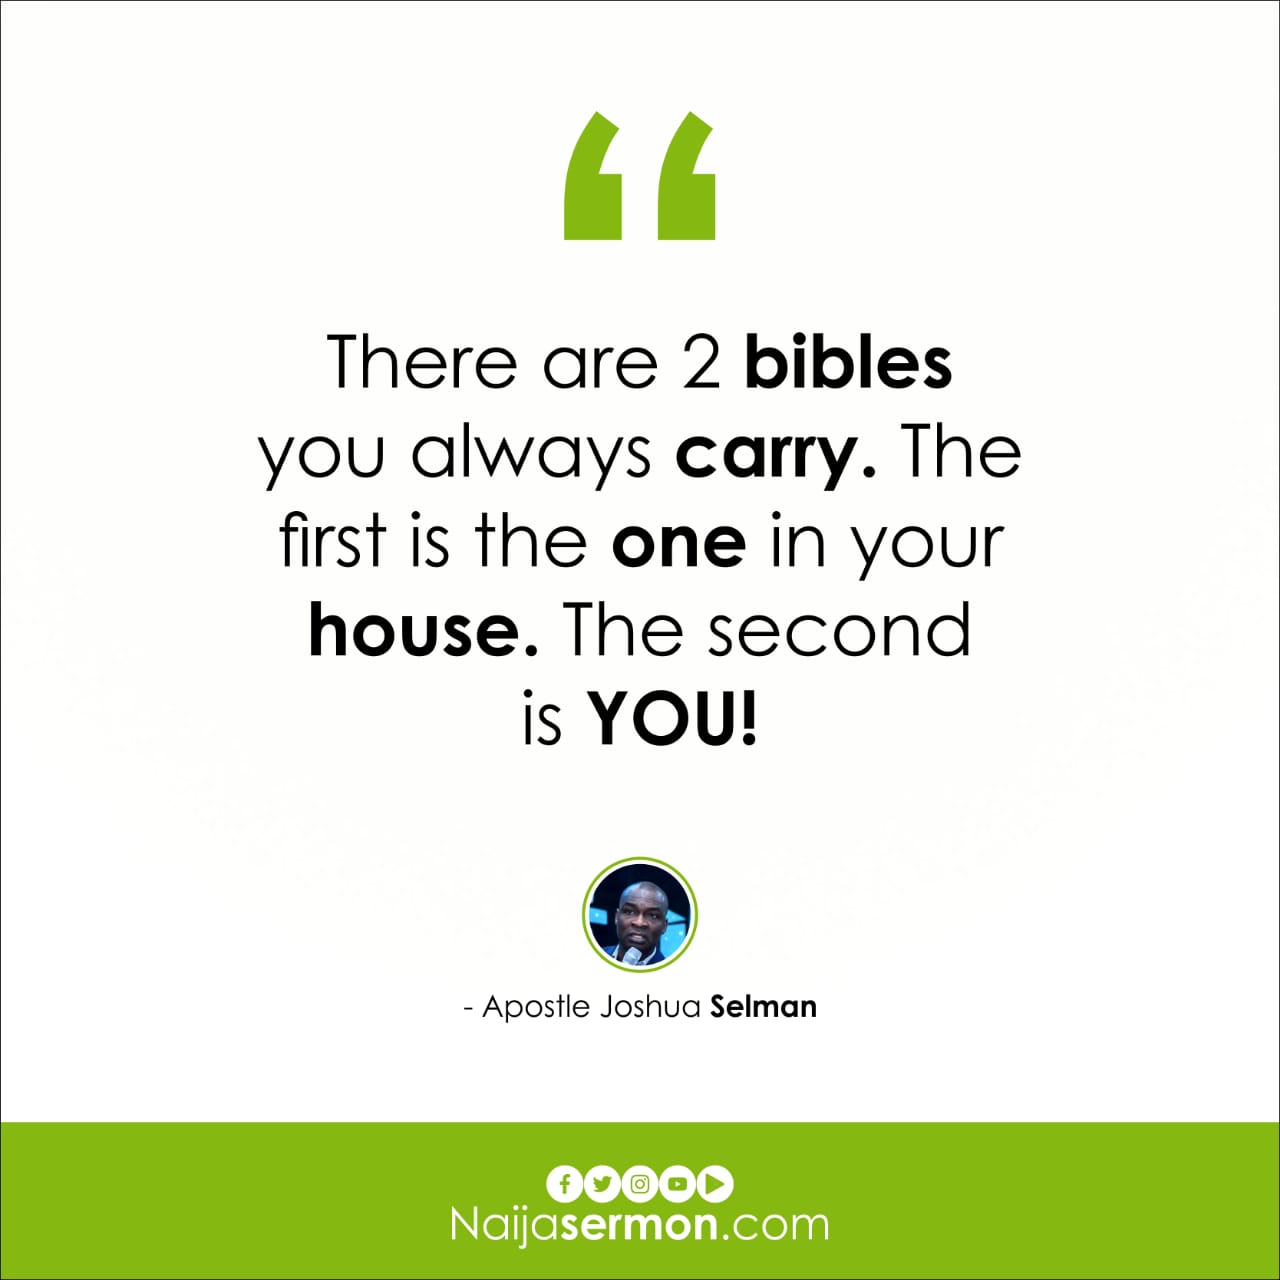 QUOTE OF THE DAY BY APOSTLE JOSHUA SELMAN 6